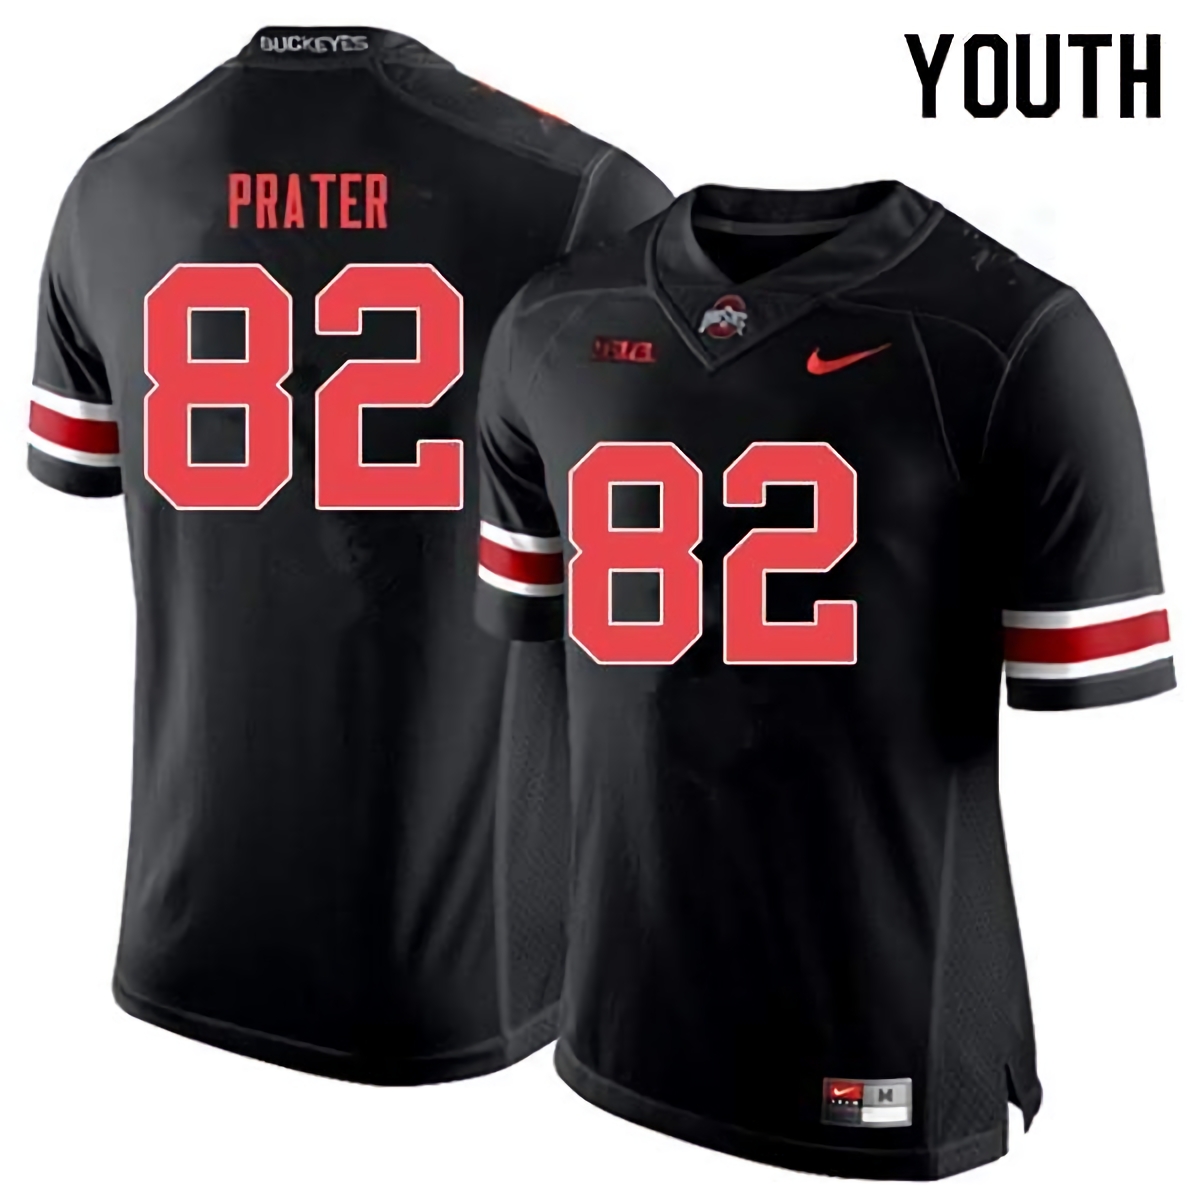 Garyn Prater Ohio State Buckeyes Youth NCAA #82 Nike Black Out College Stitched Football Jersey WWN3556HL